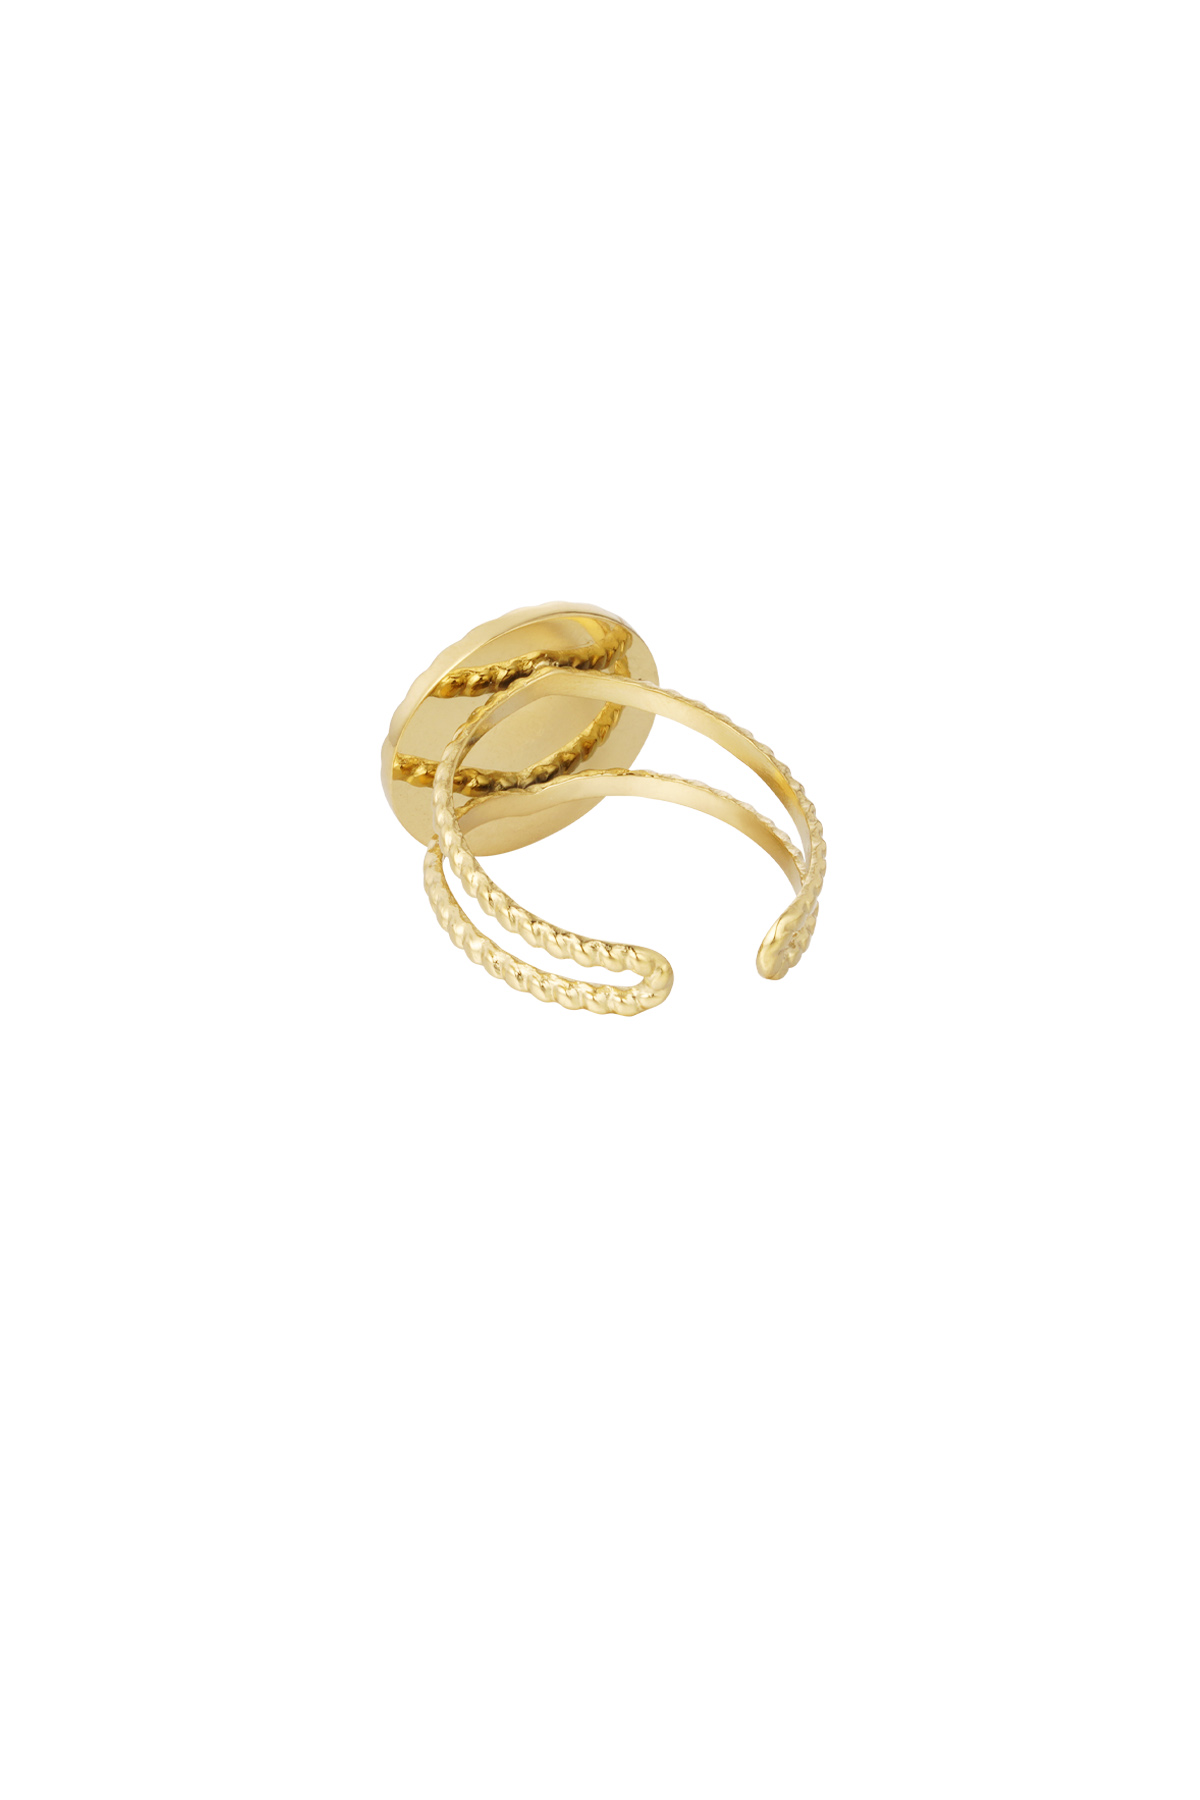 Ring round stone - gold/beige Picture5